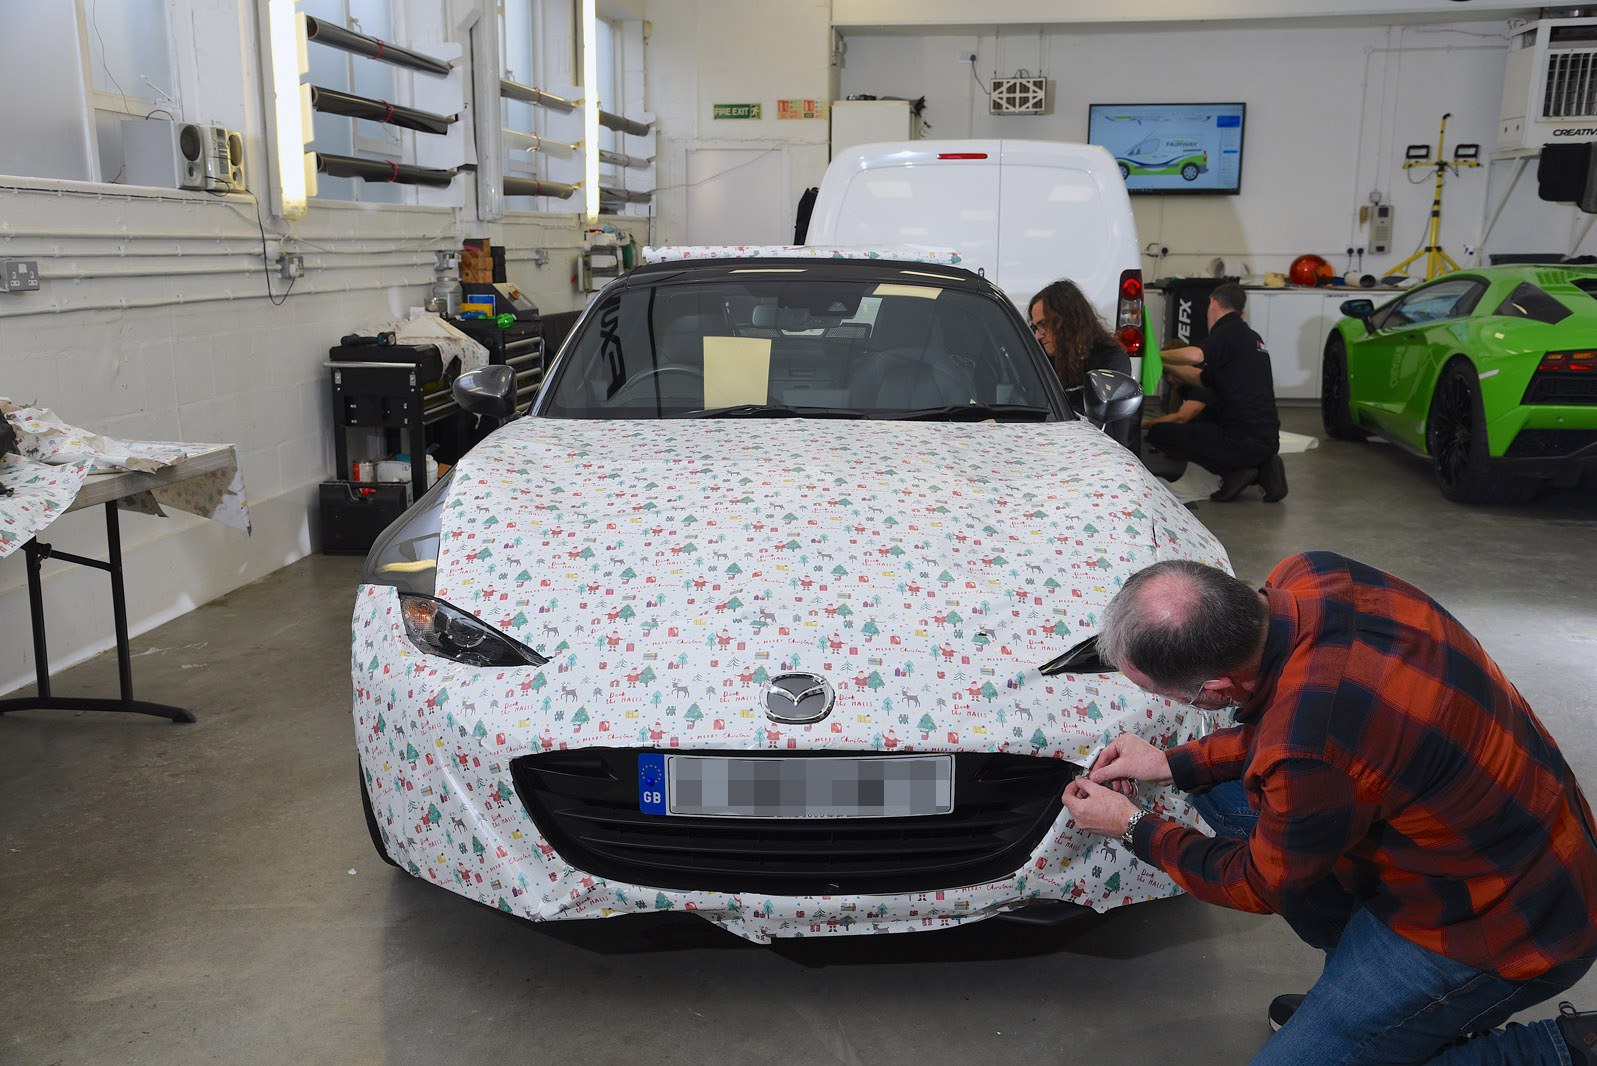 Can you wrap a car in wrapping paper?